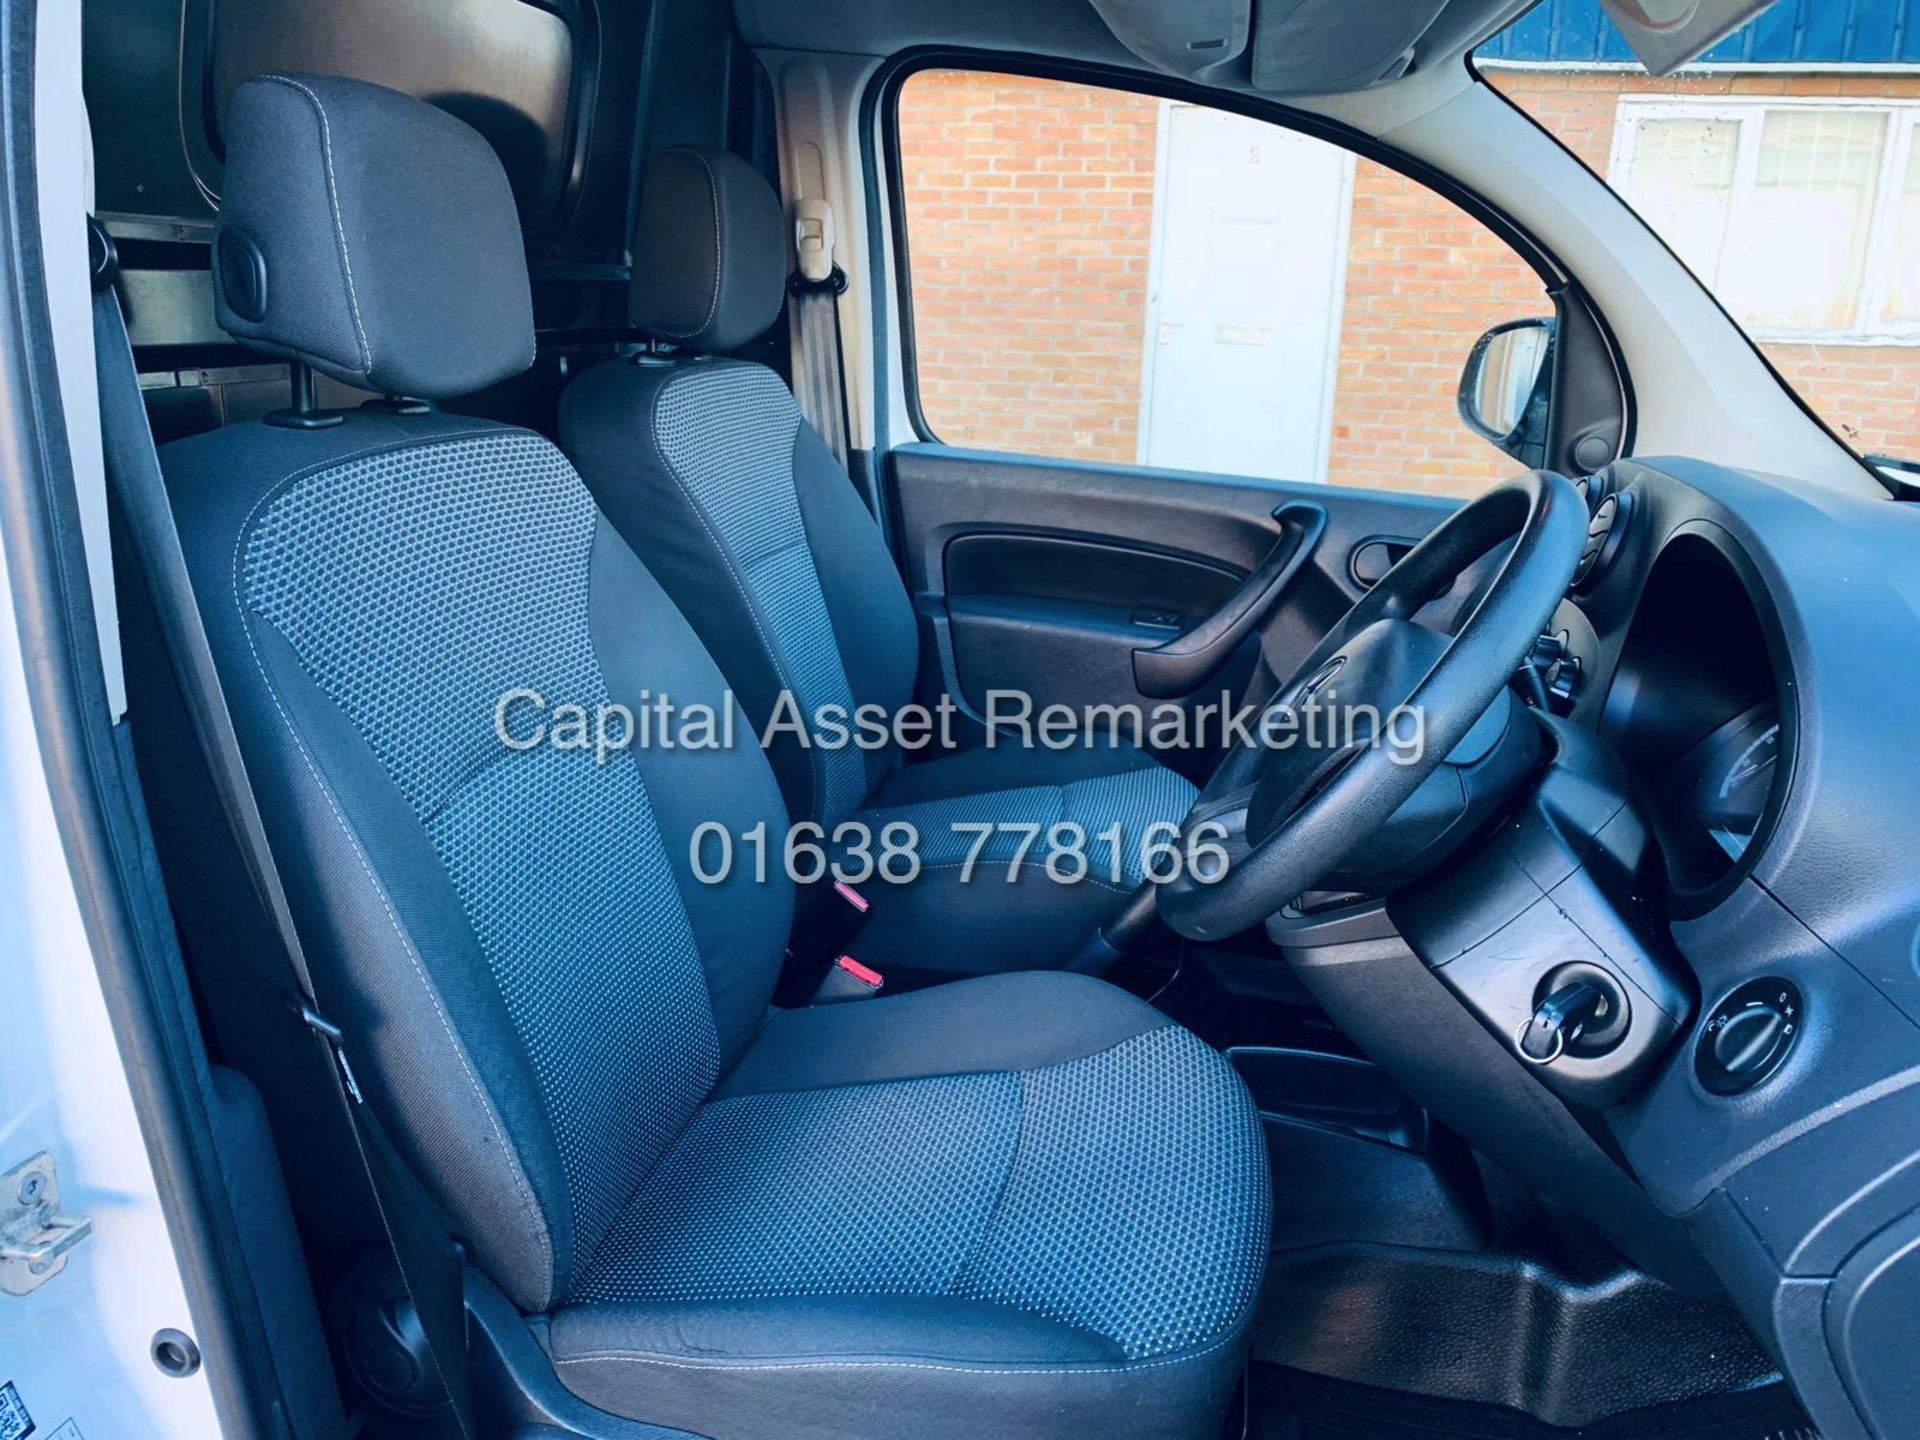 ON SALE MERCEDES CITAN 109CDI LWB - 16 REG - ONLY 20K MILES AND 1 OWNER - FSH - TAKE A PEEK - Image 10 of 15